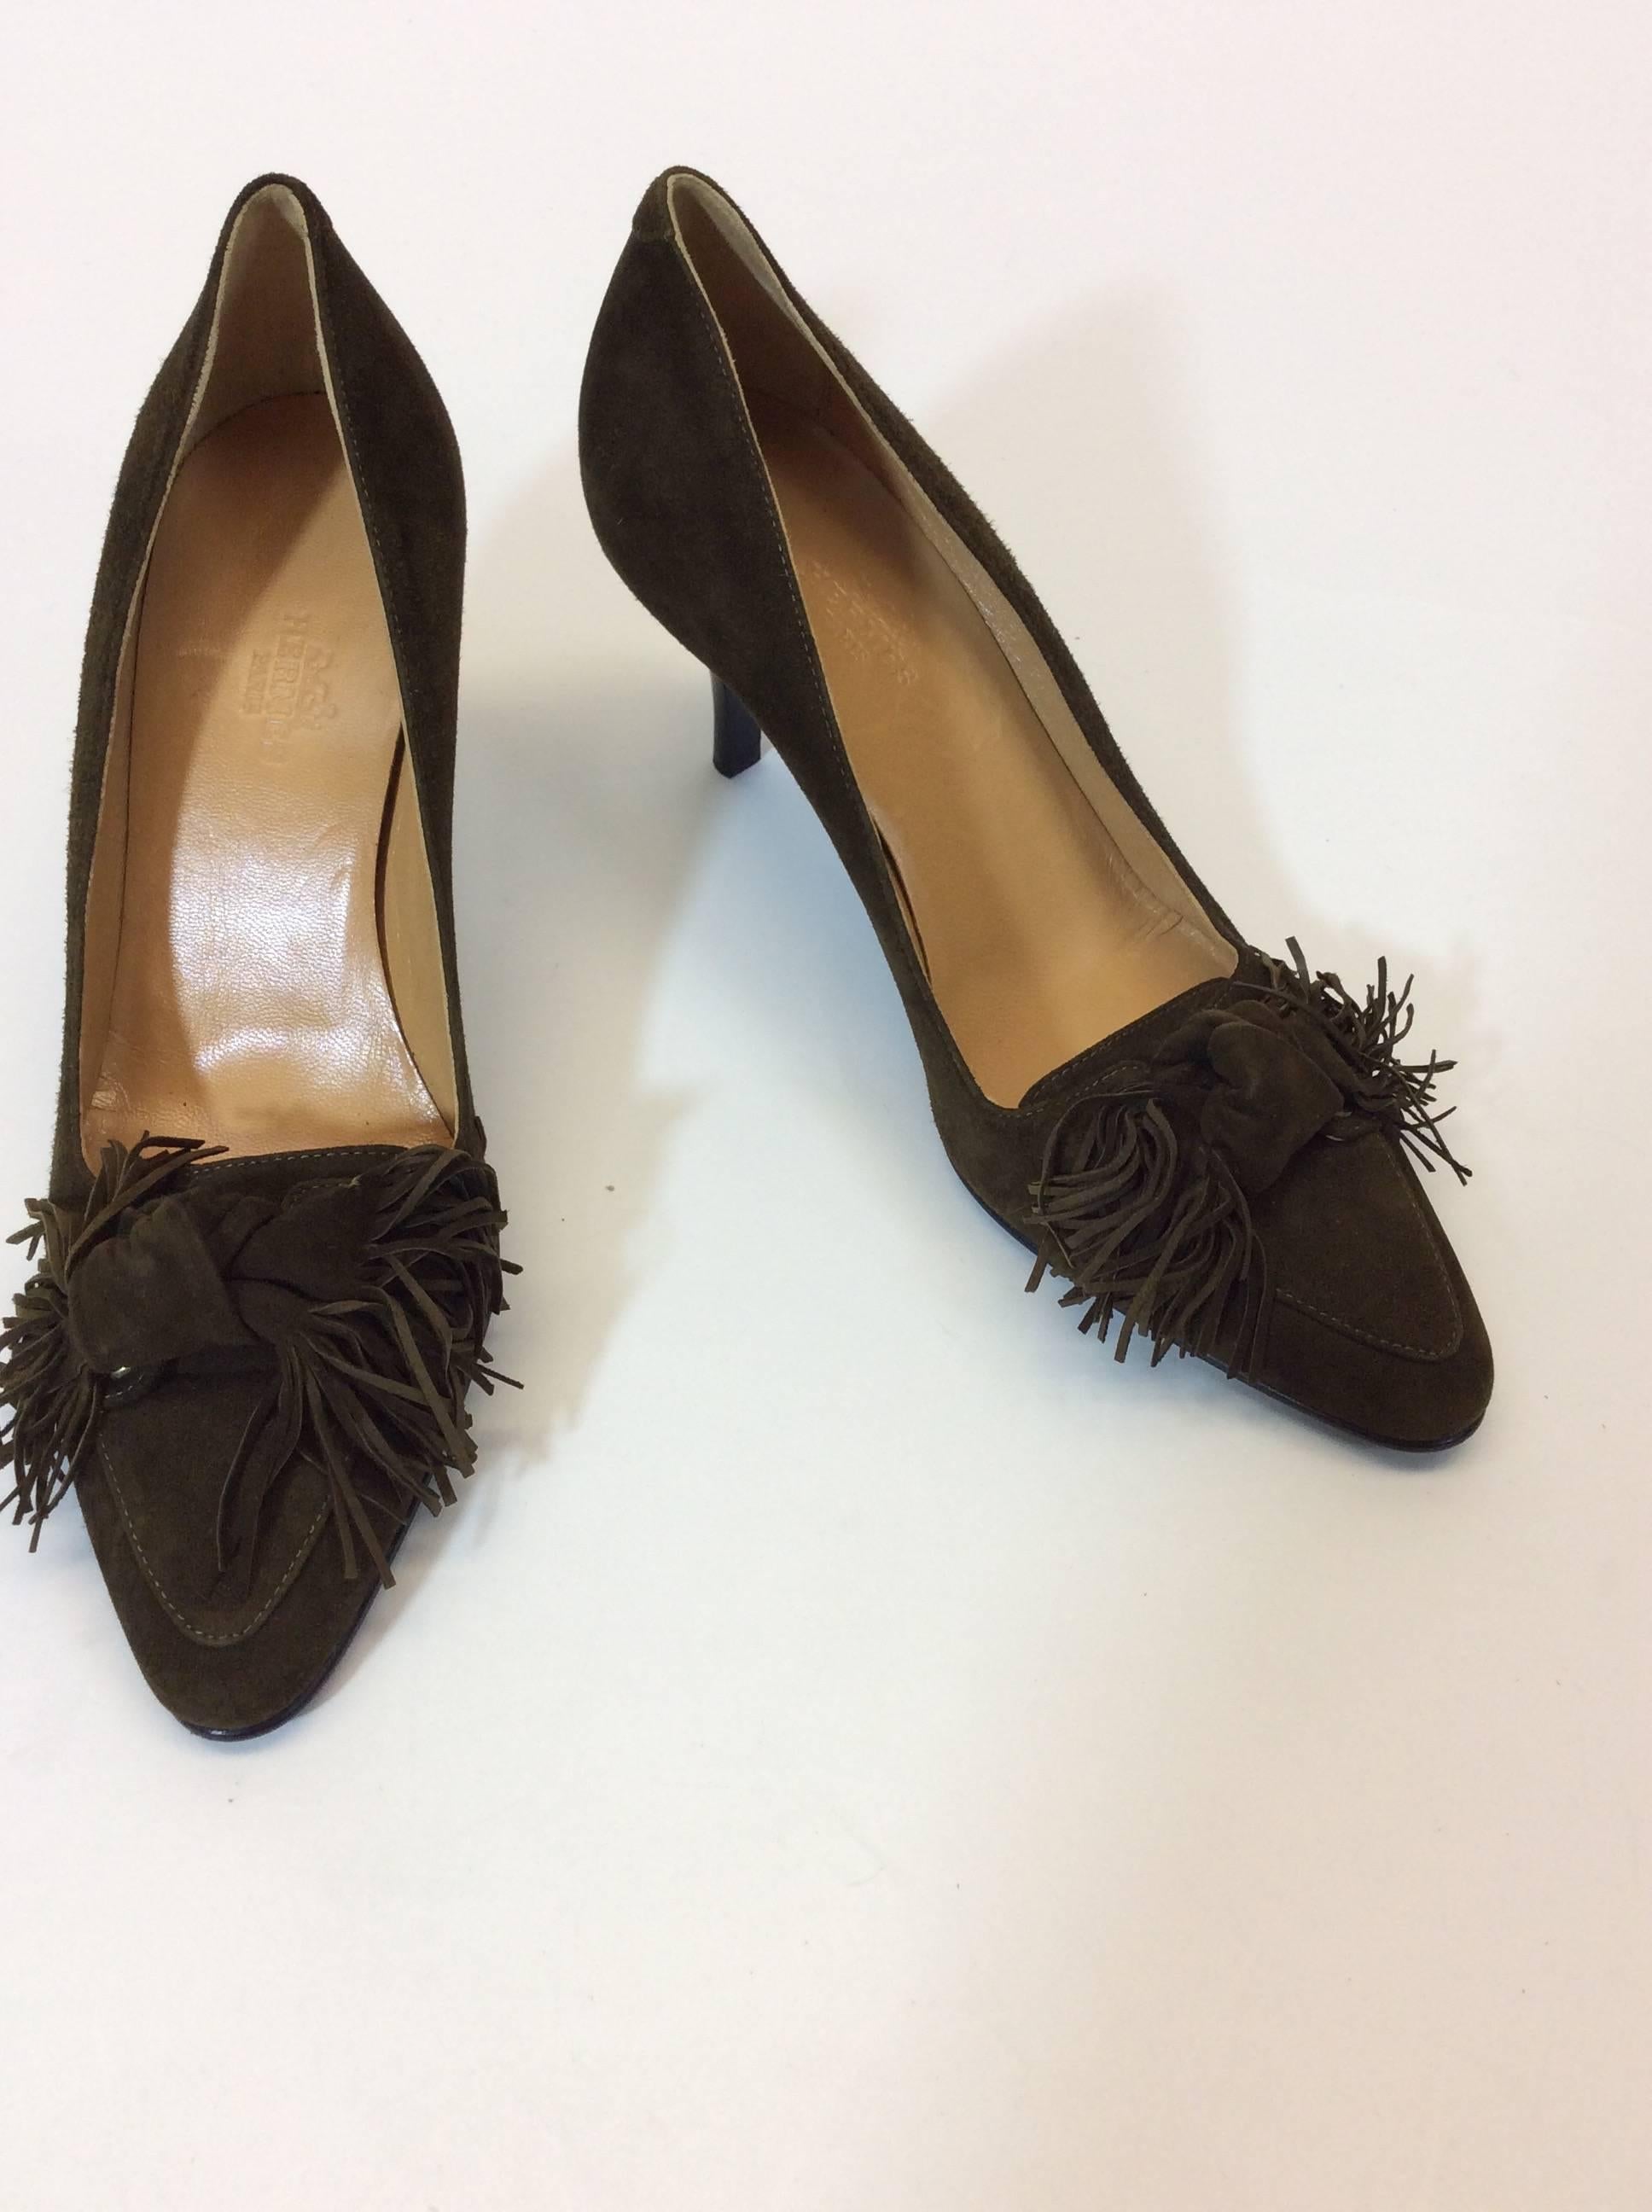 Fringe Detail on Toe of Shoe
Genuine Brown Suede 
EU Size 36 
Includes Dust Bag
3.25" Inch Sole 
3" Inch Heel